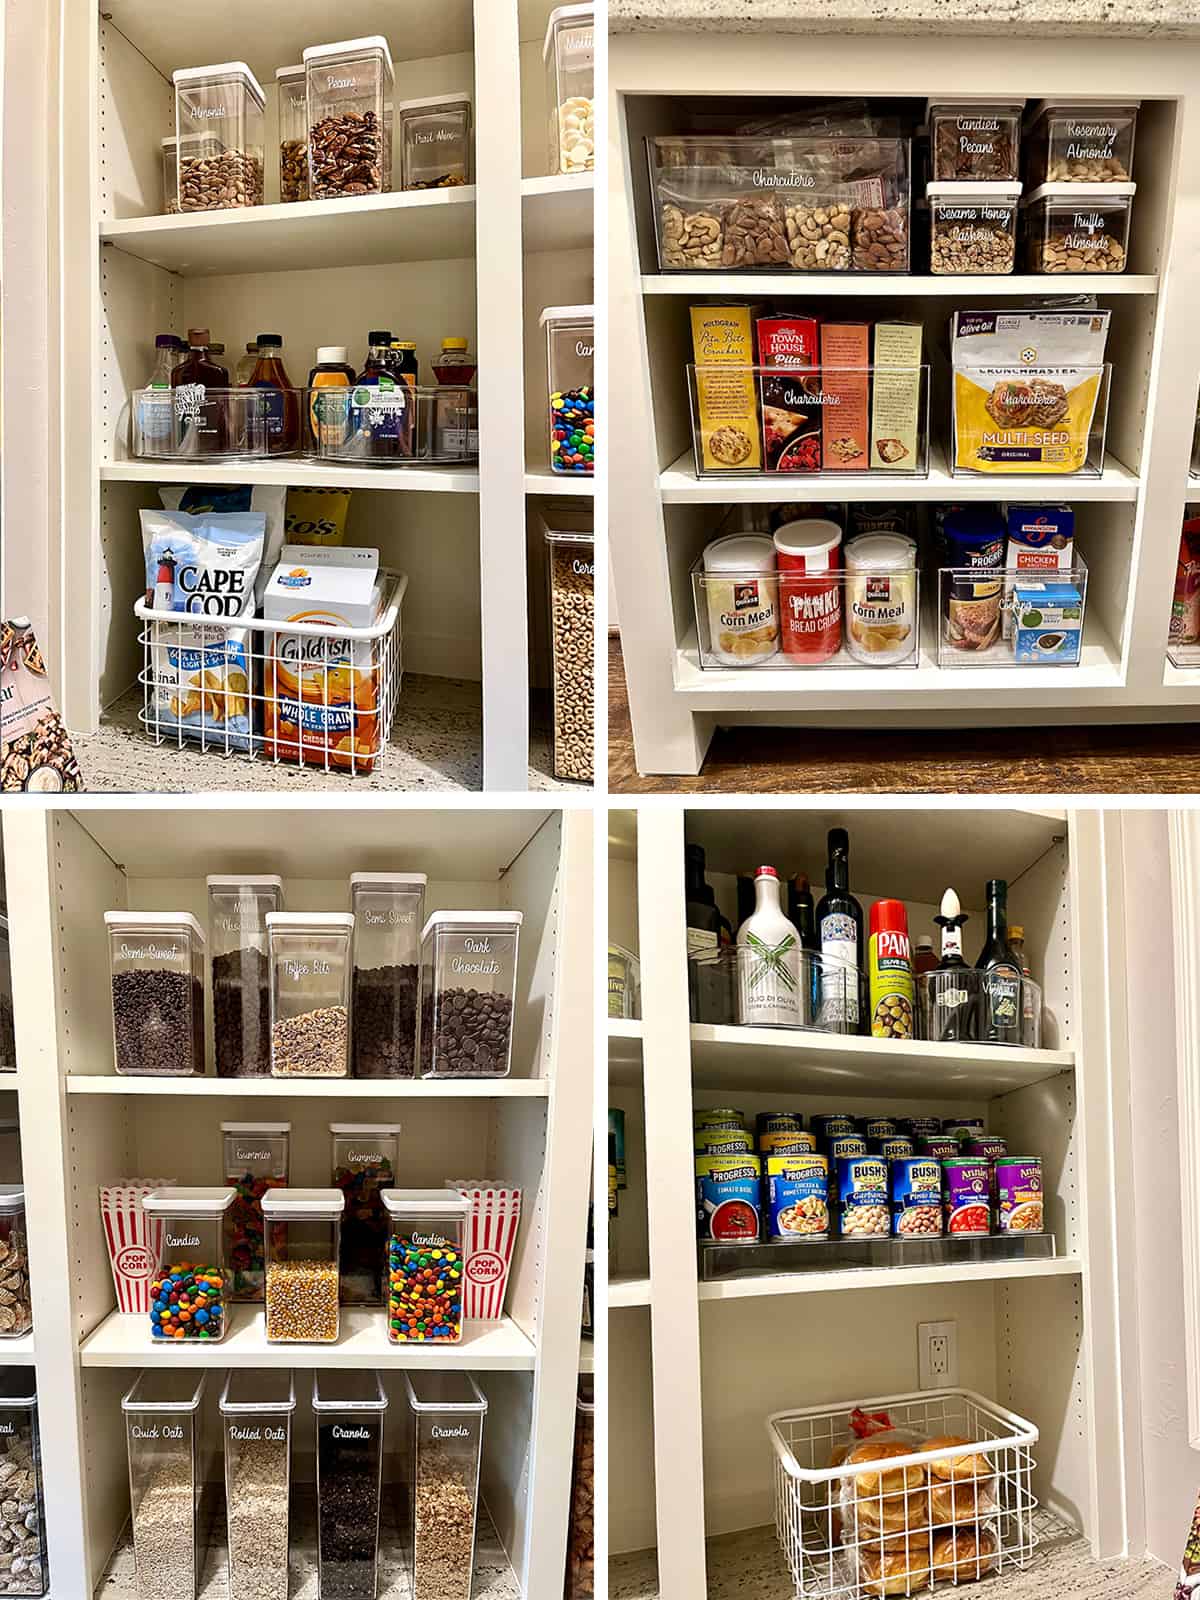 Pantry sections